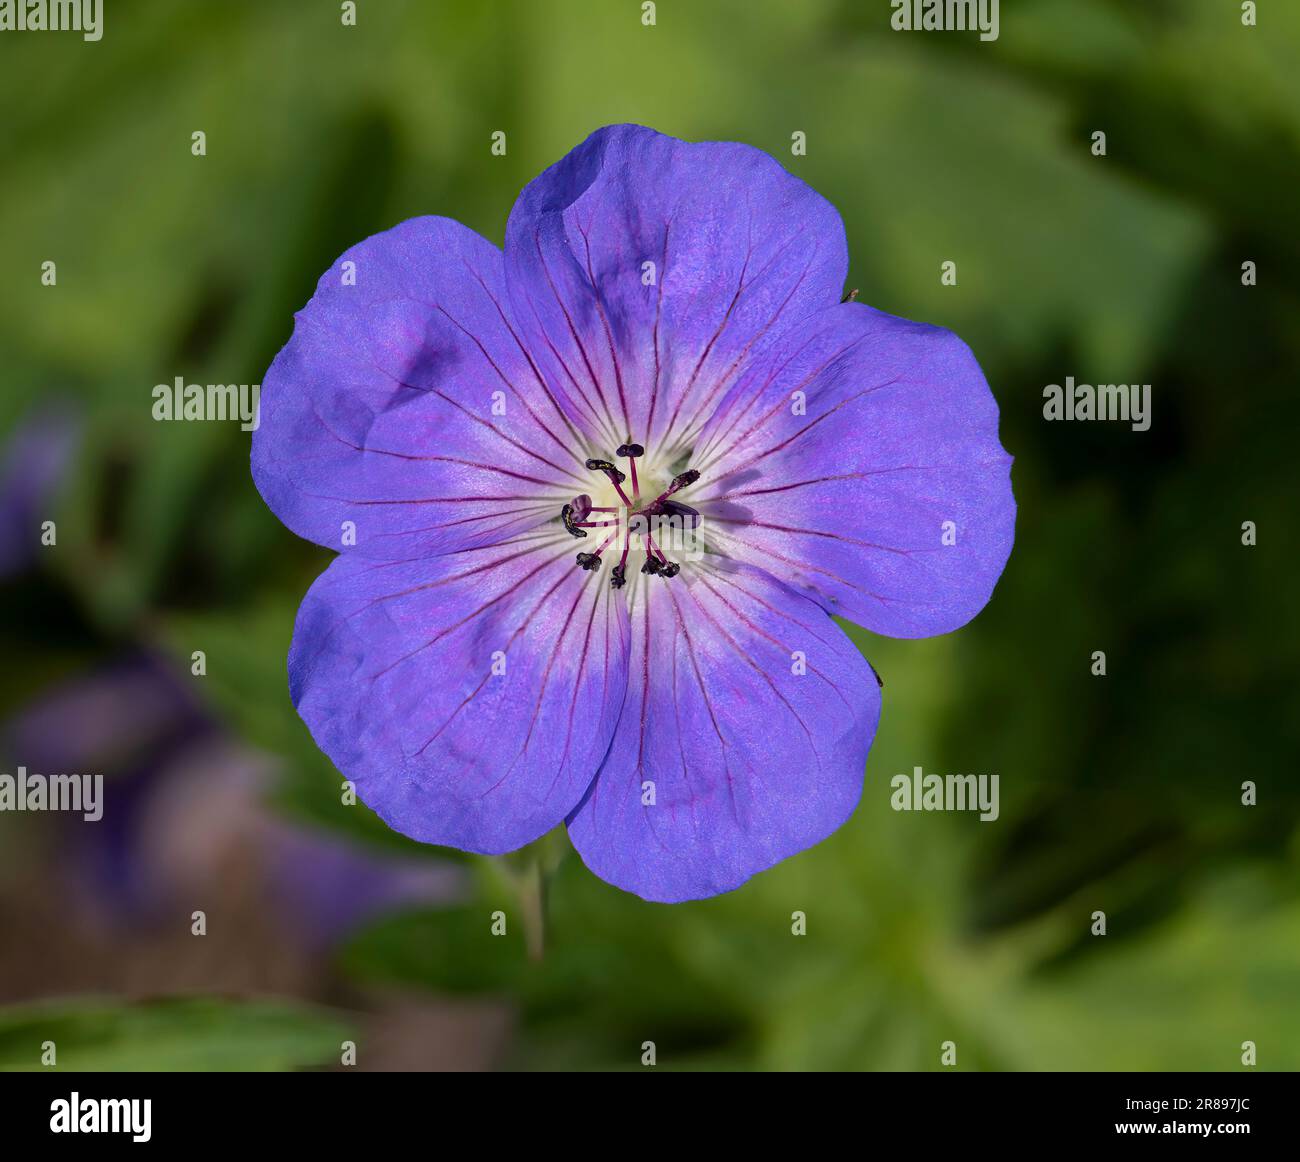 Solitary flower of a purple wild Geranium also known as the Purple Cranesbill Stock Photo